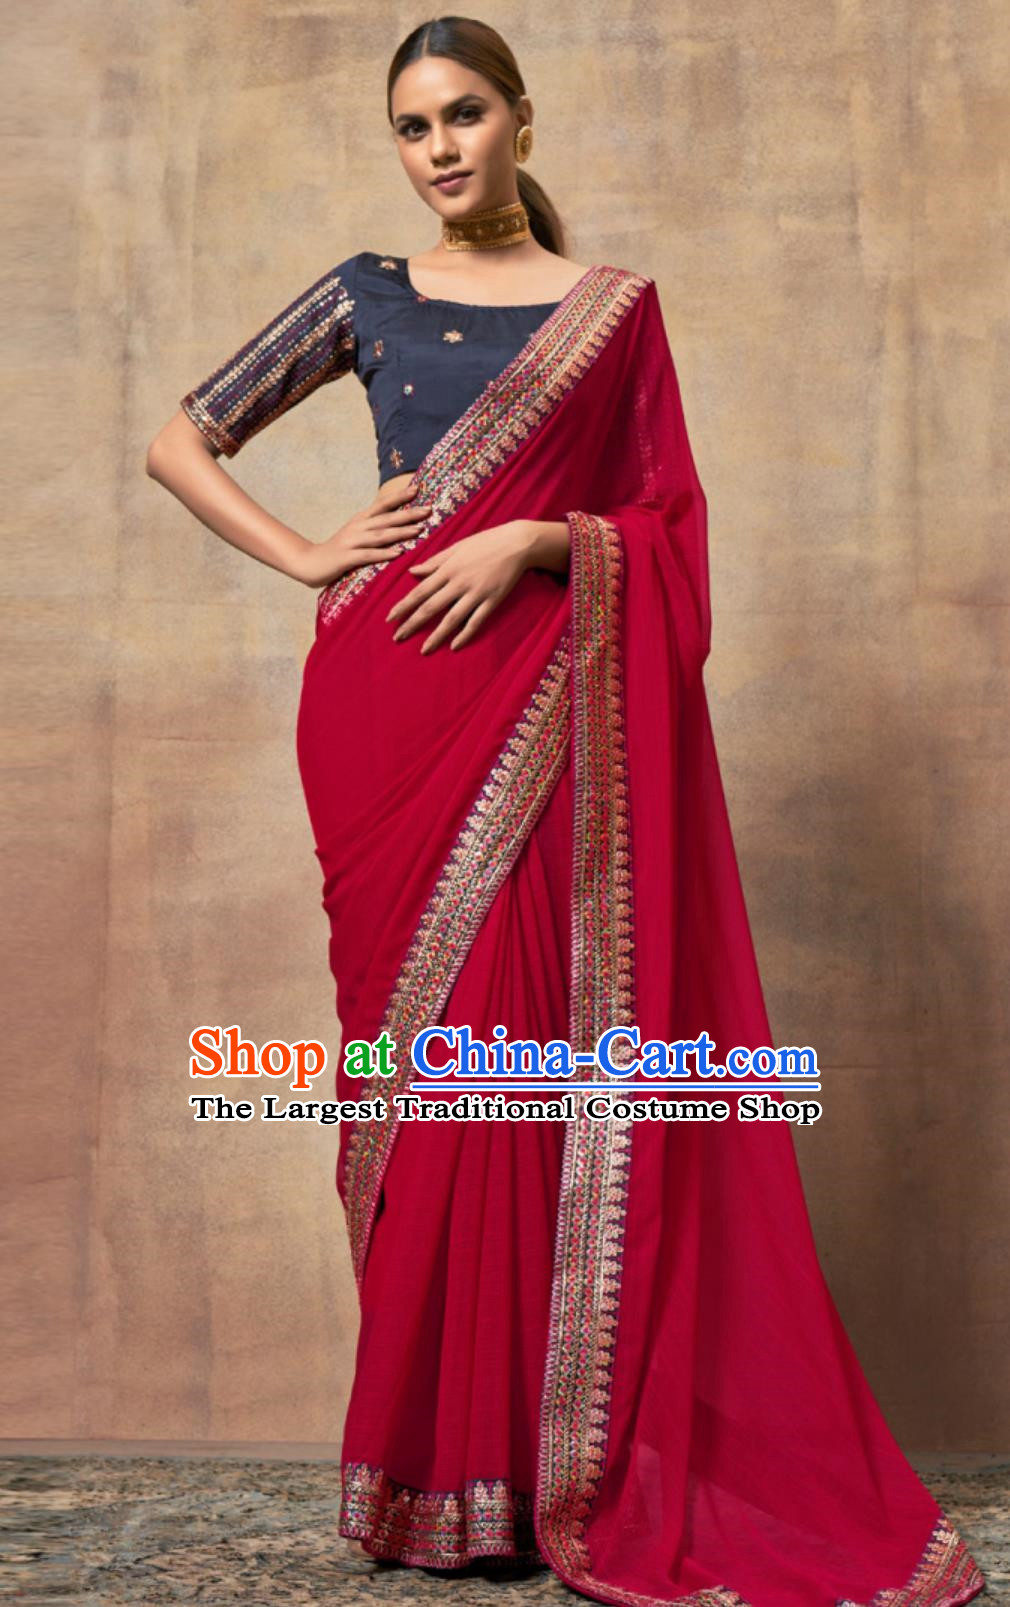 Traditional Indian Sari Women Slimming Blouse and Wrap Skirt India National Clothing